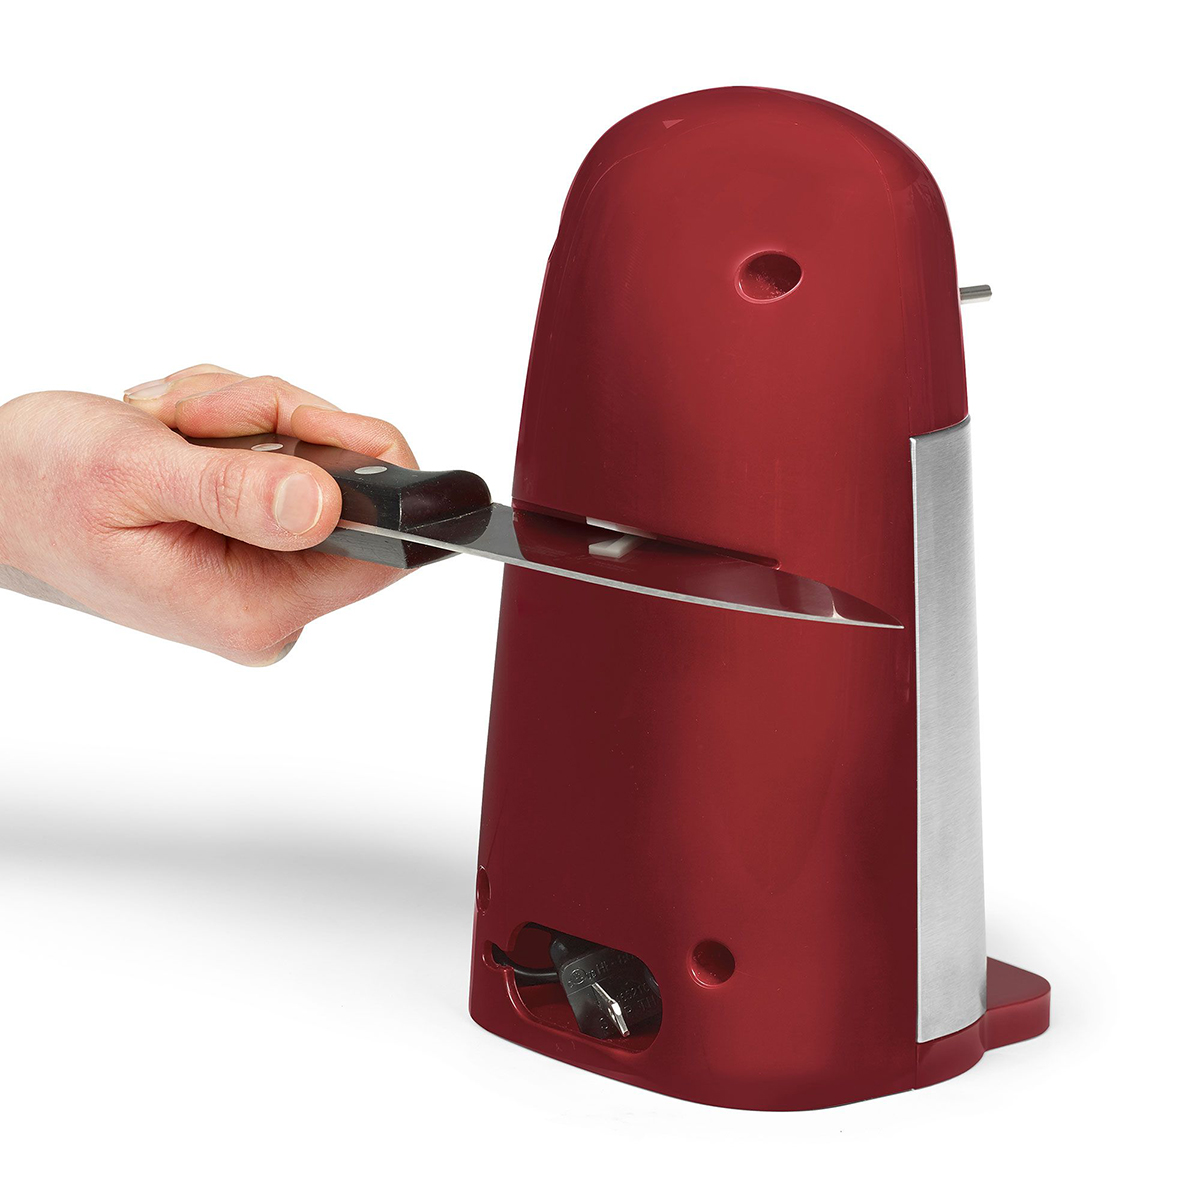 Starfrit 3 In 1 Electric Can Opener